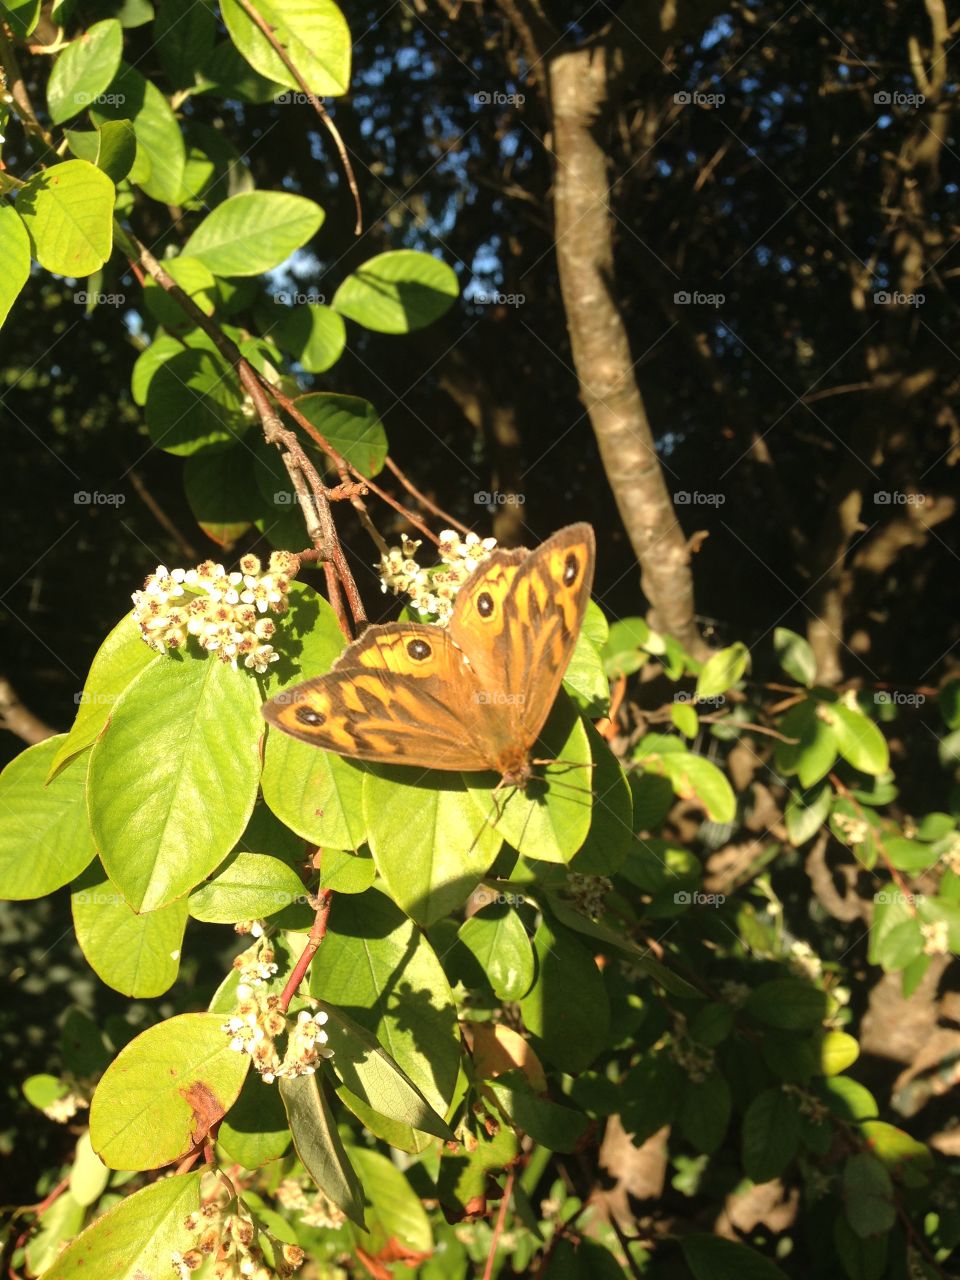 Monarch butterfly in nature